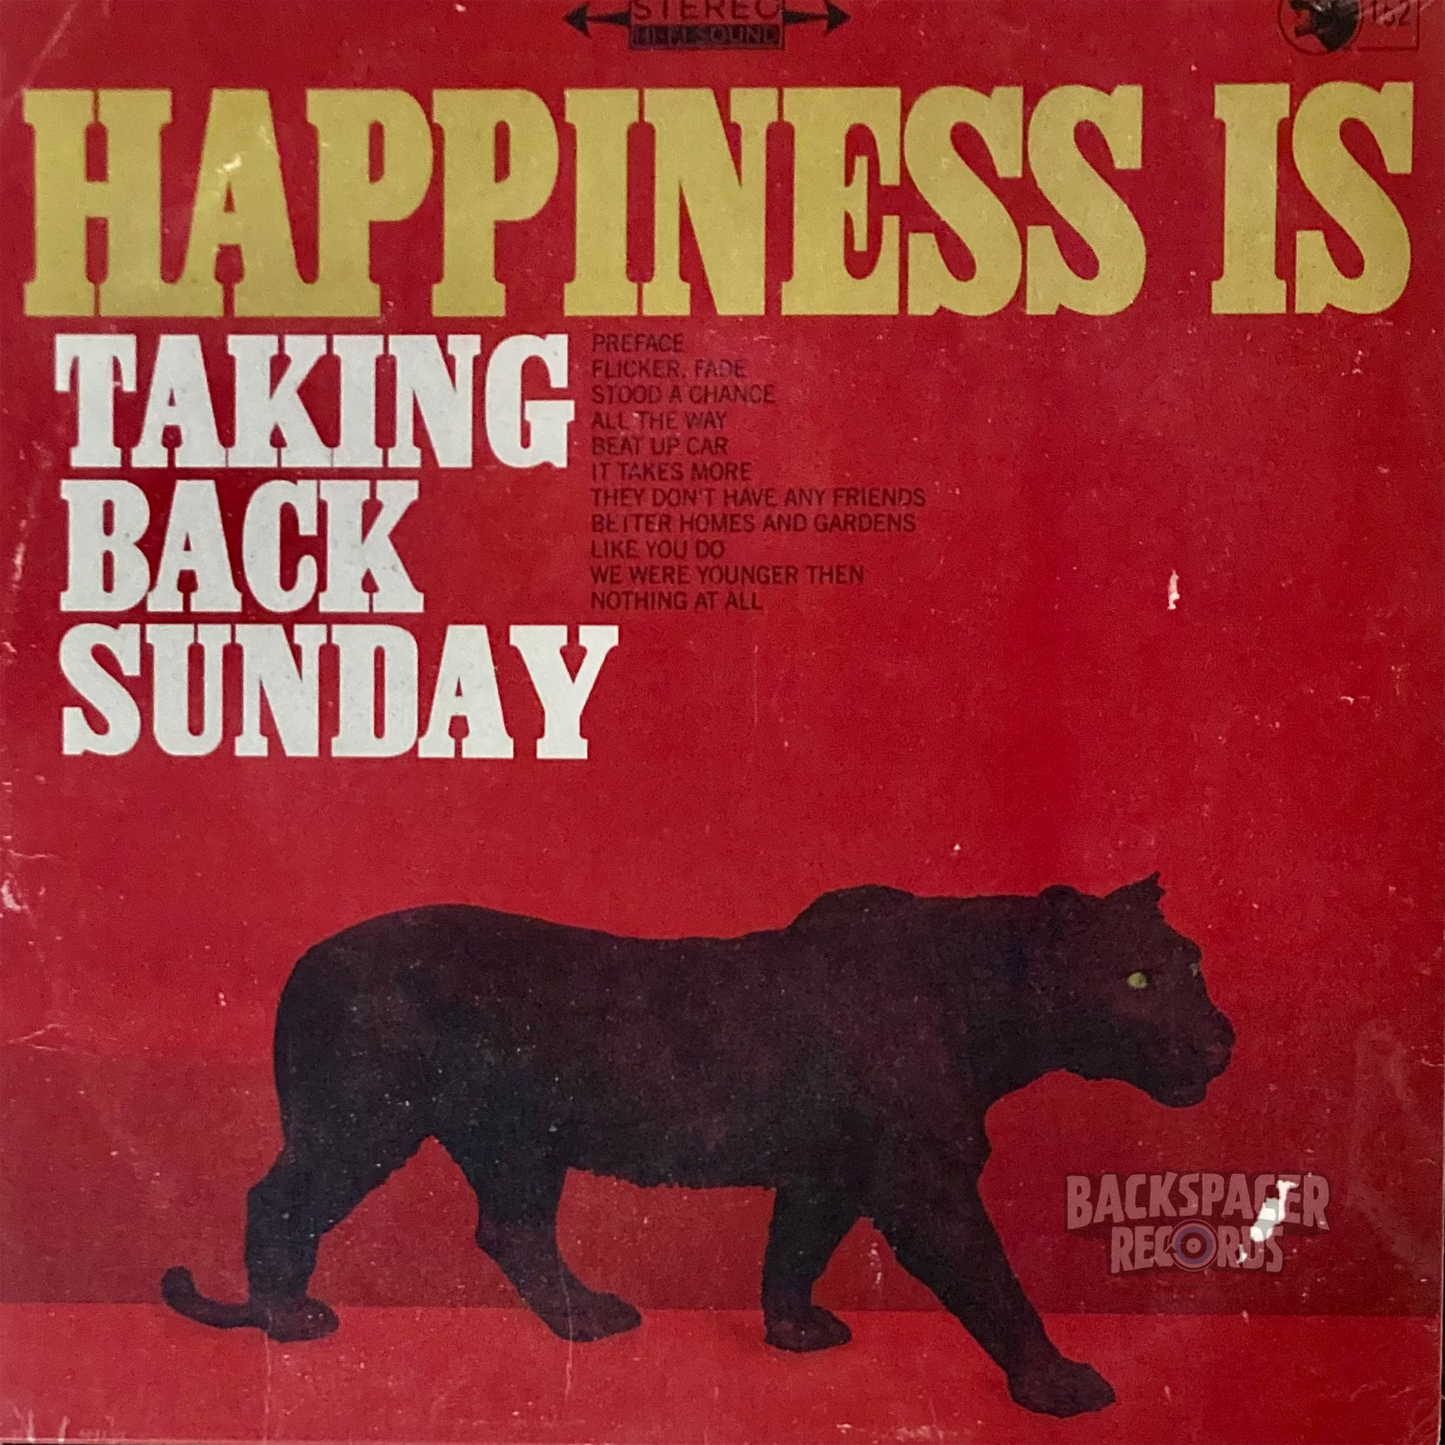 Taking Back Sunday - Happiness Is LP (Sealed)